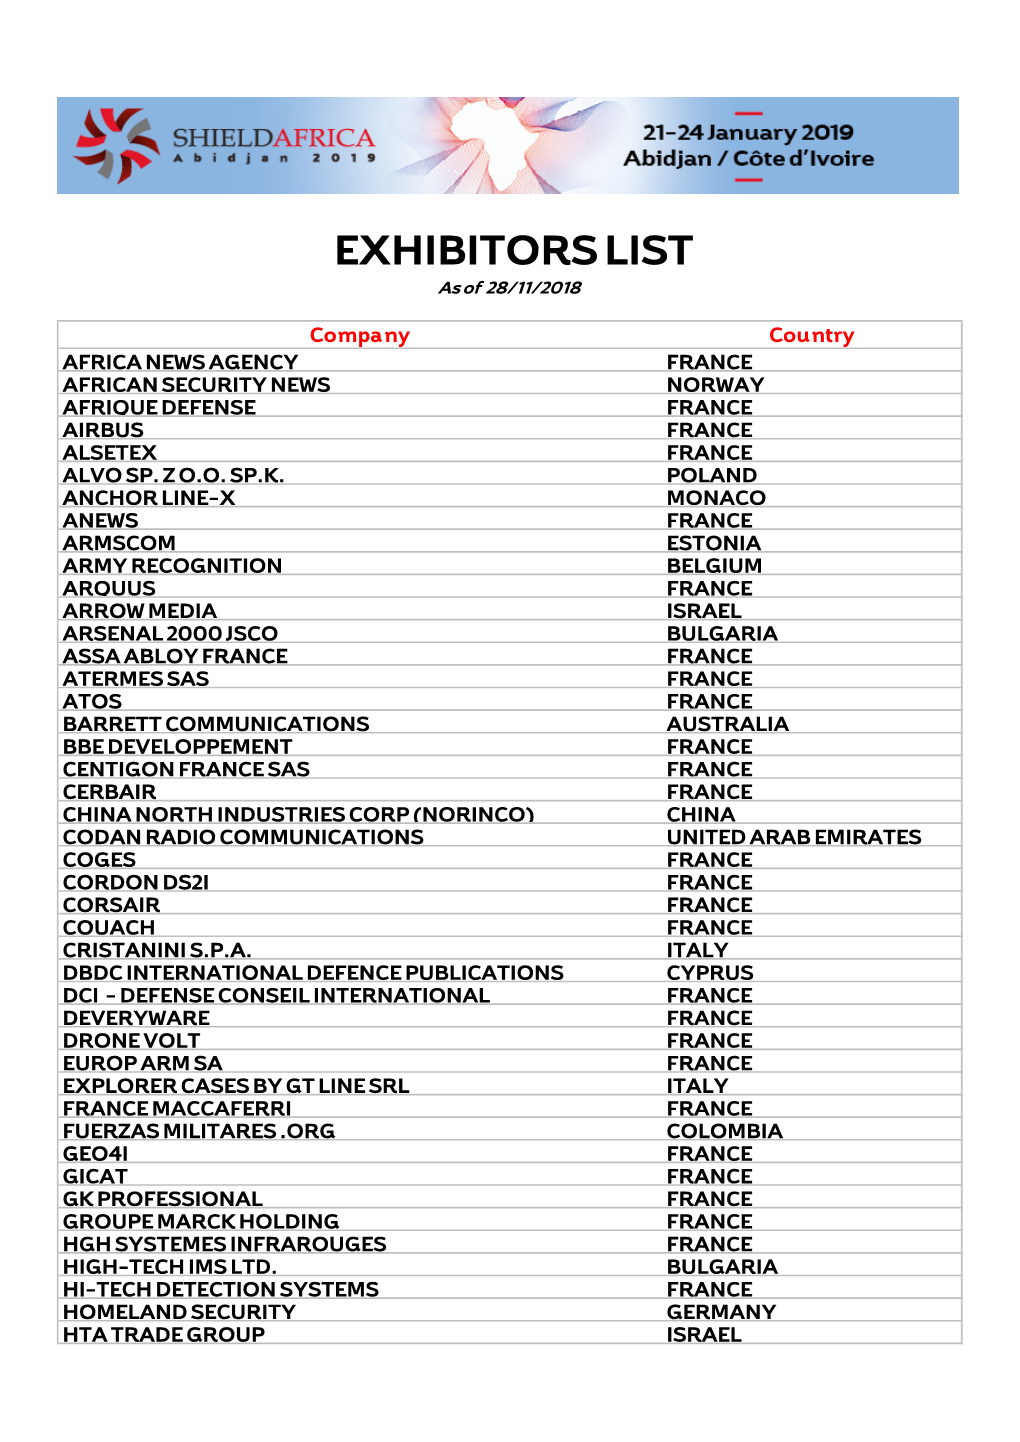 EXHIBITORS LIST As of 28/11/2018